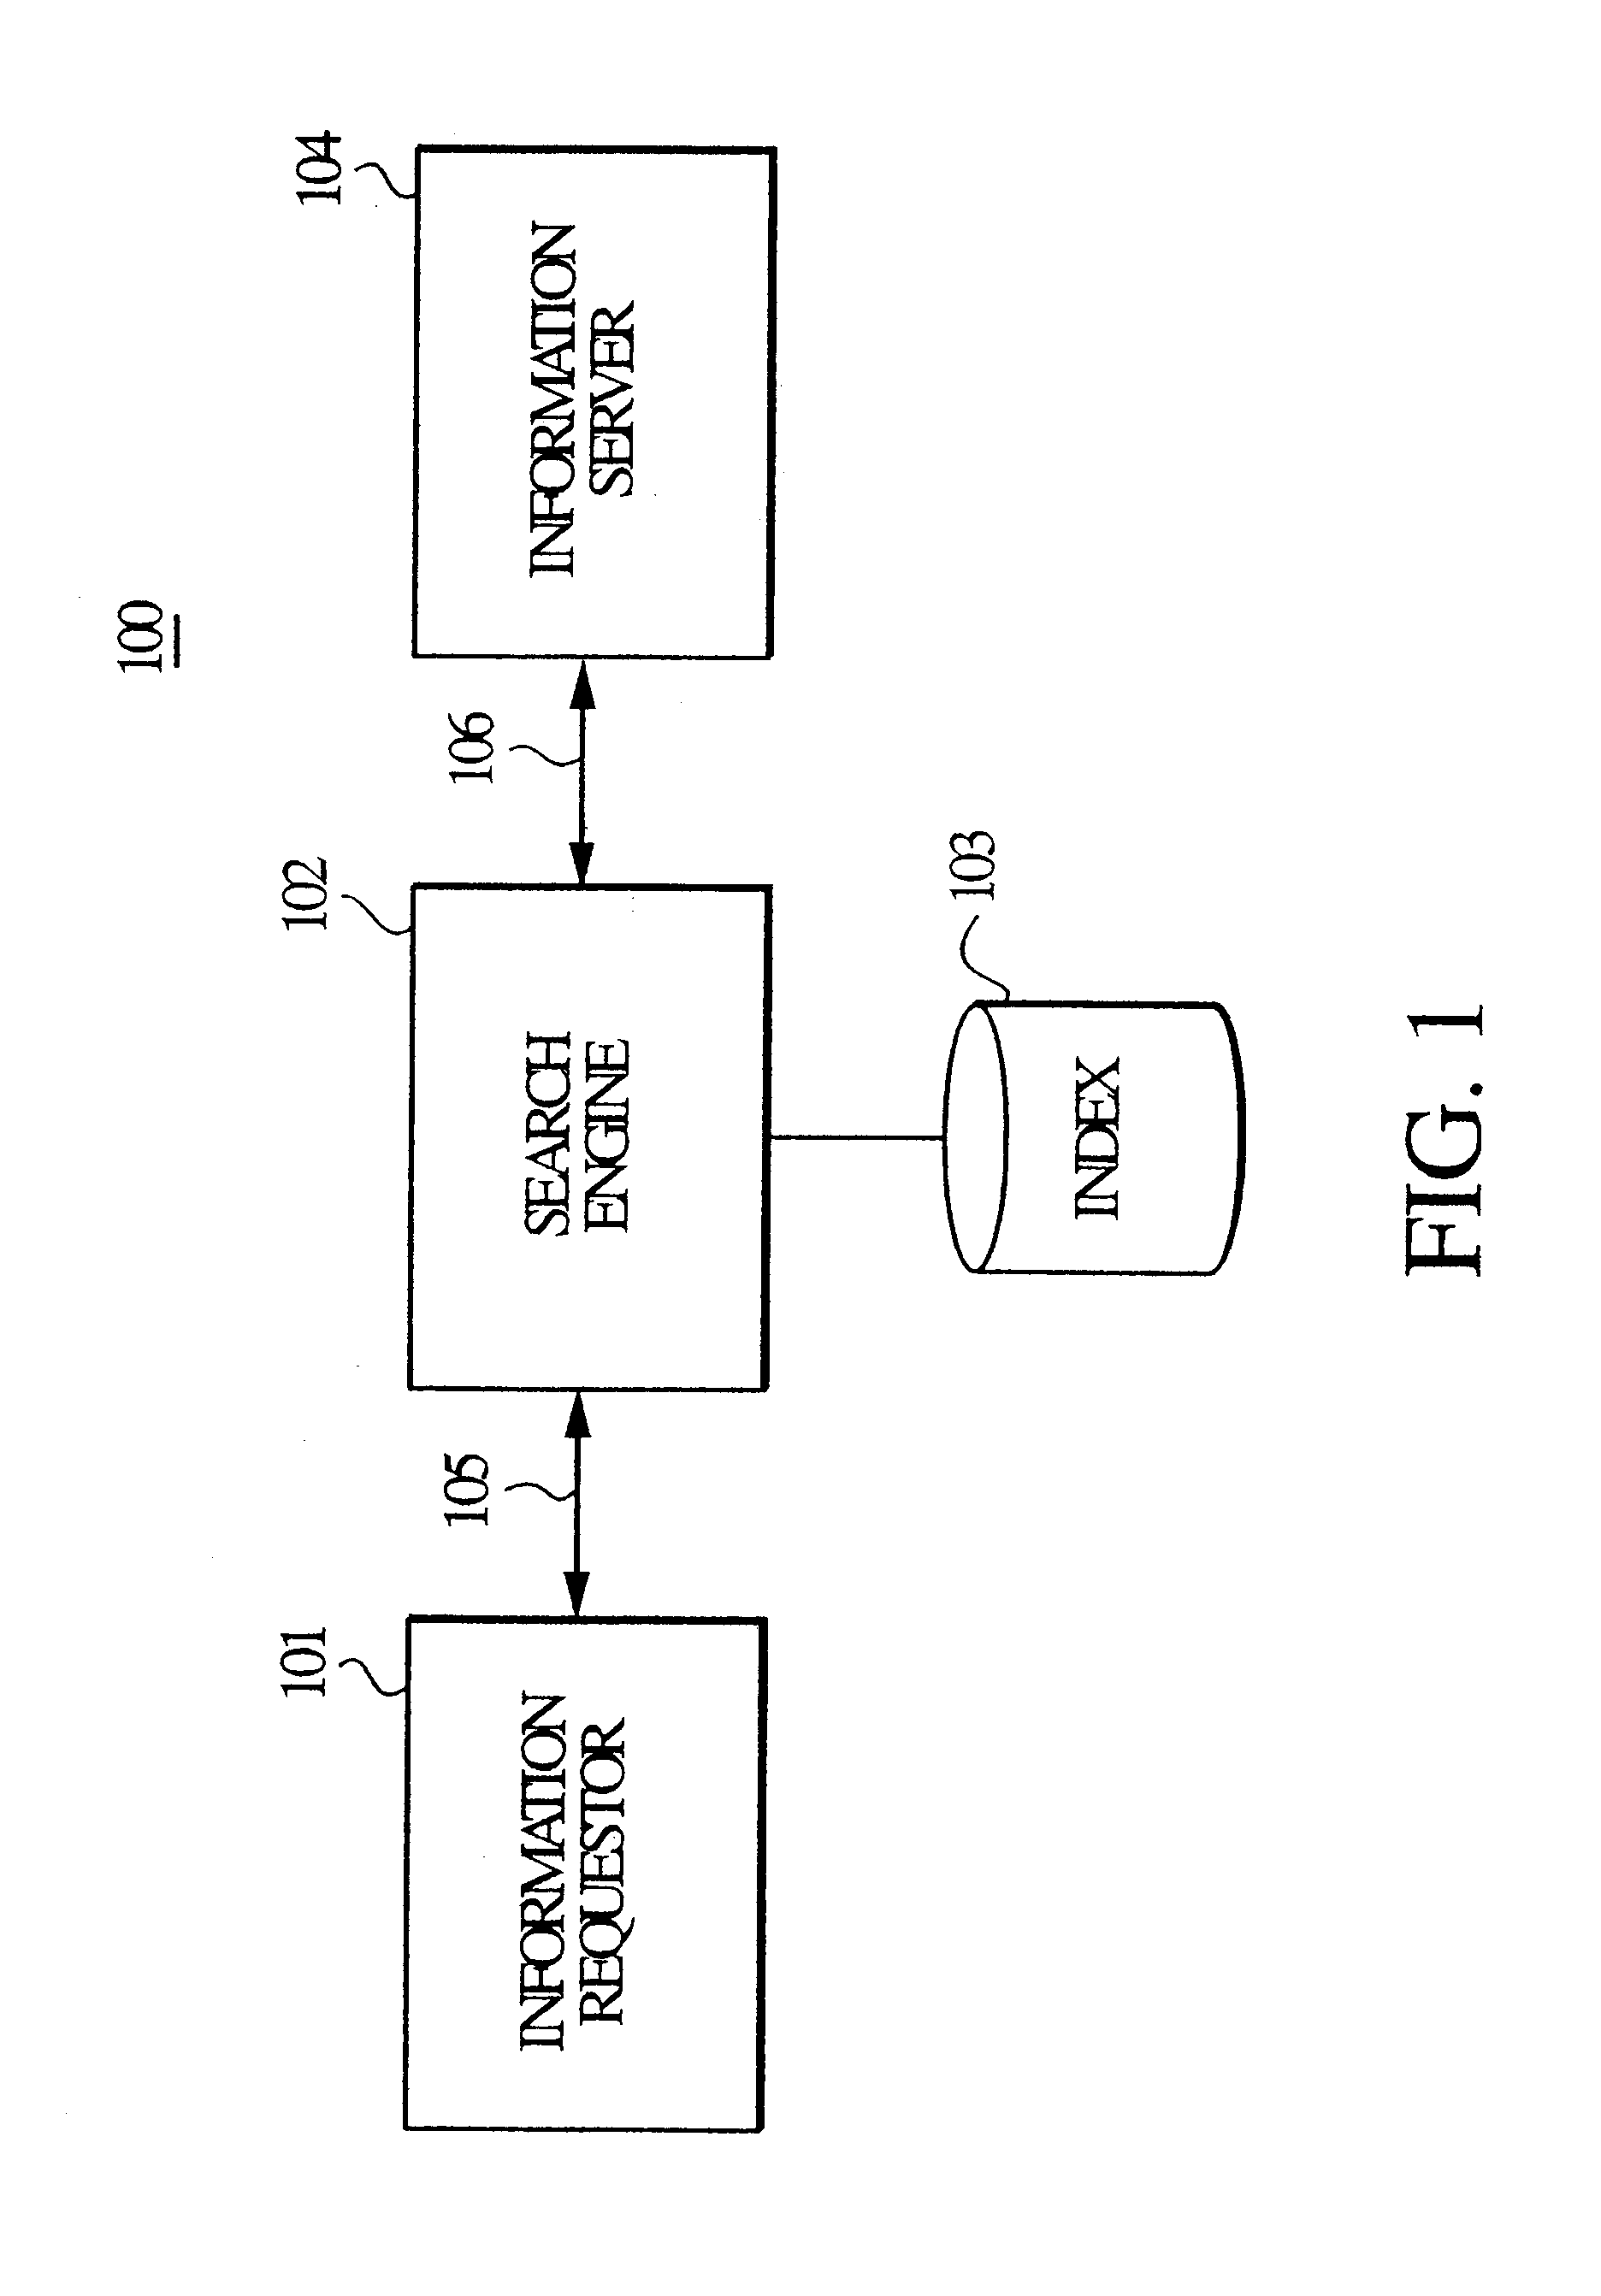 Implicit rating of retrieved information in an information search system